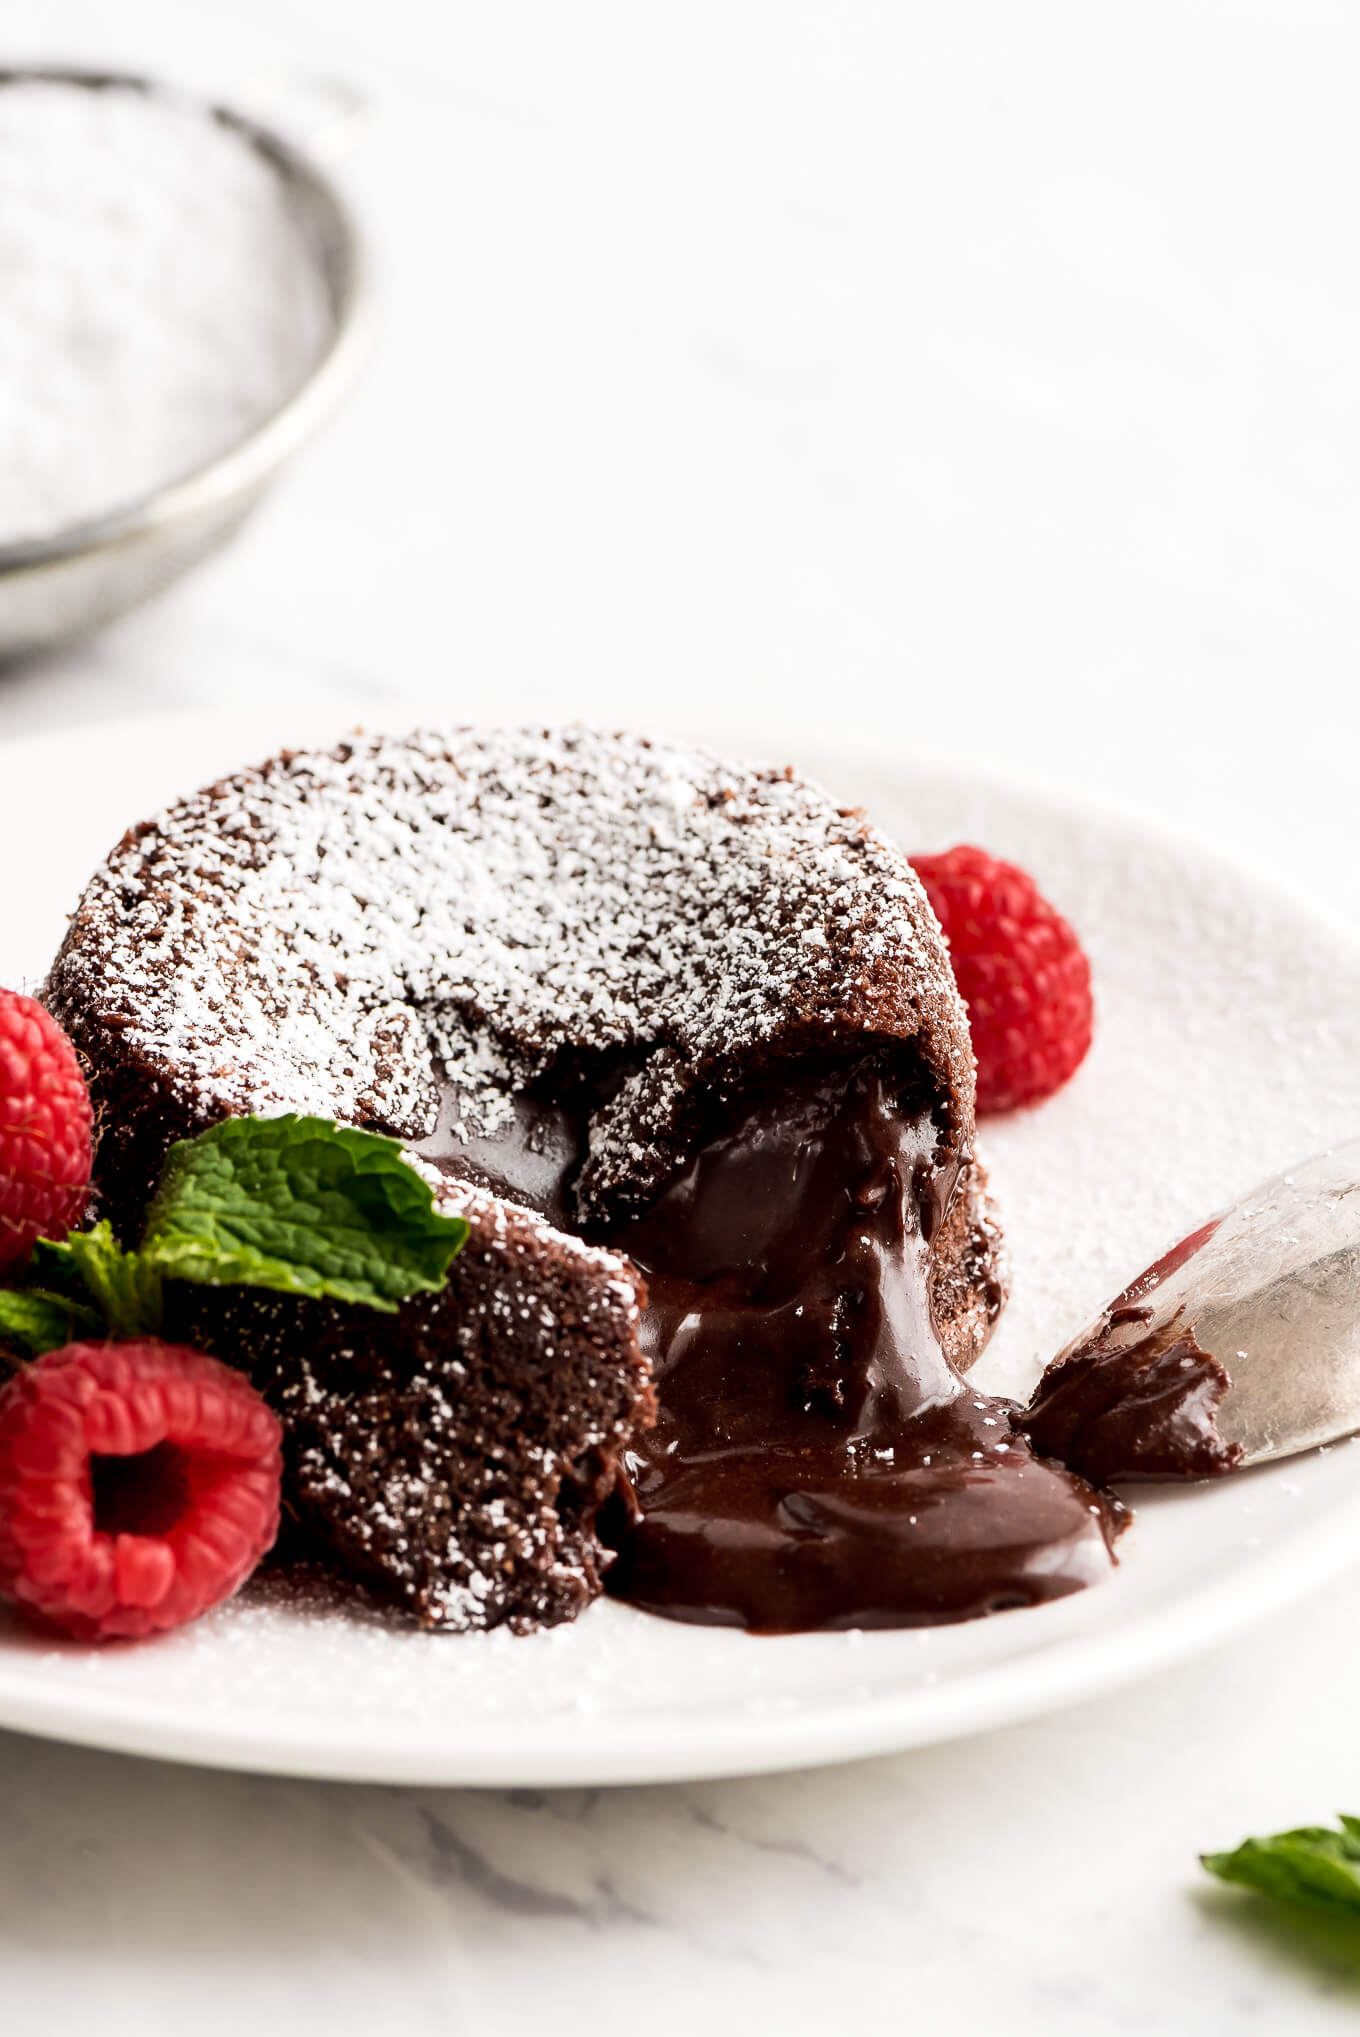 A Molten Lava Cake on a plate, dusted with powdered sugar, chocolate oozing out, and raspberries on the side.